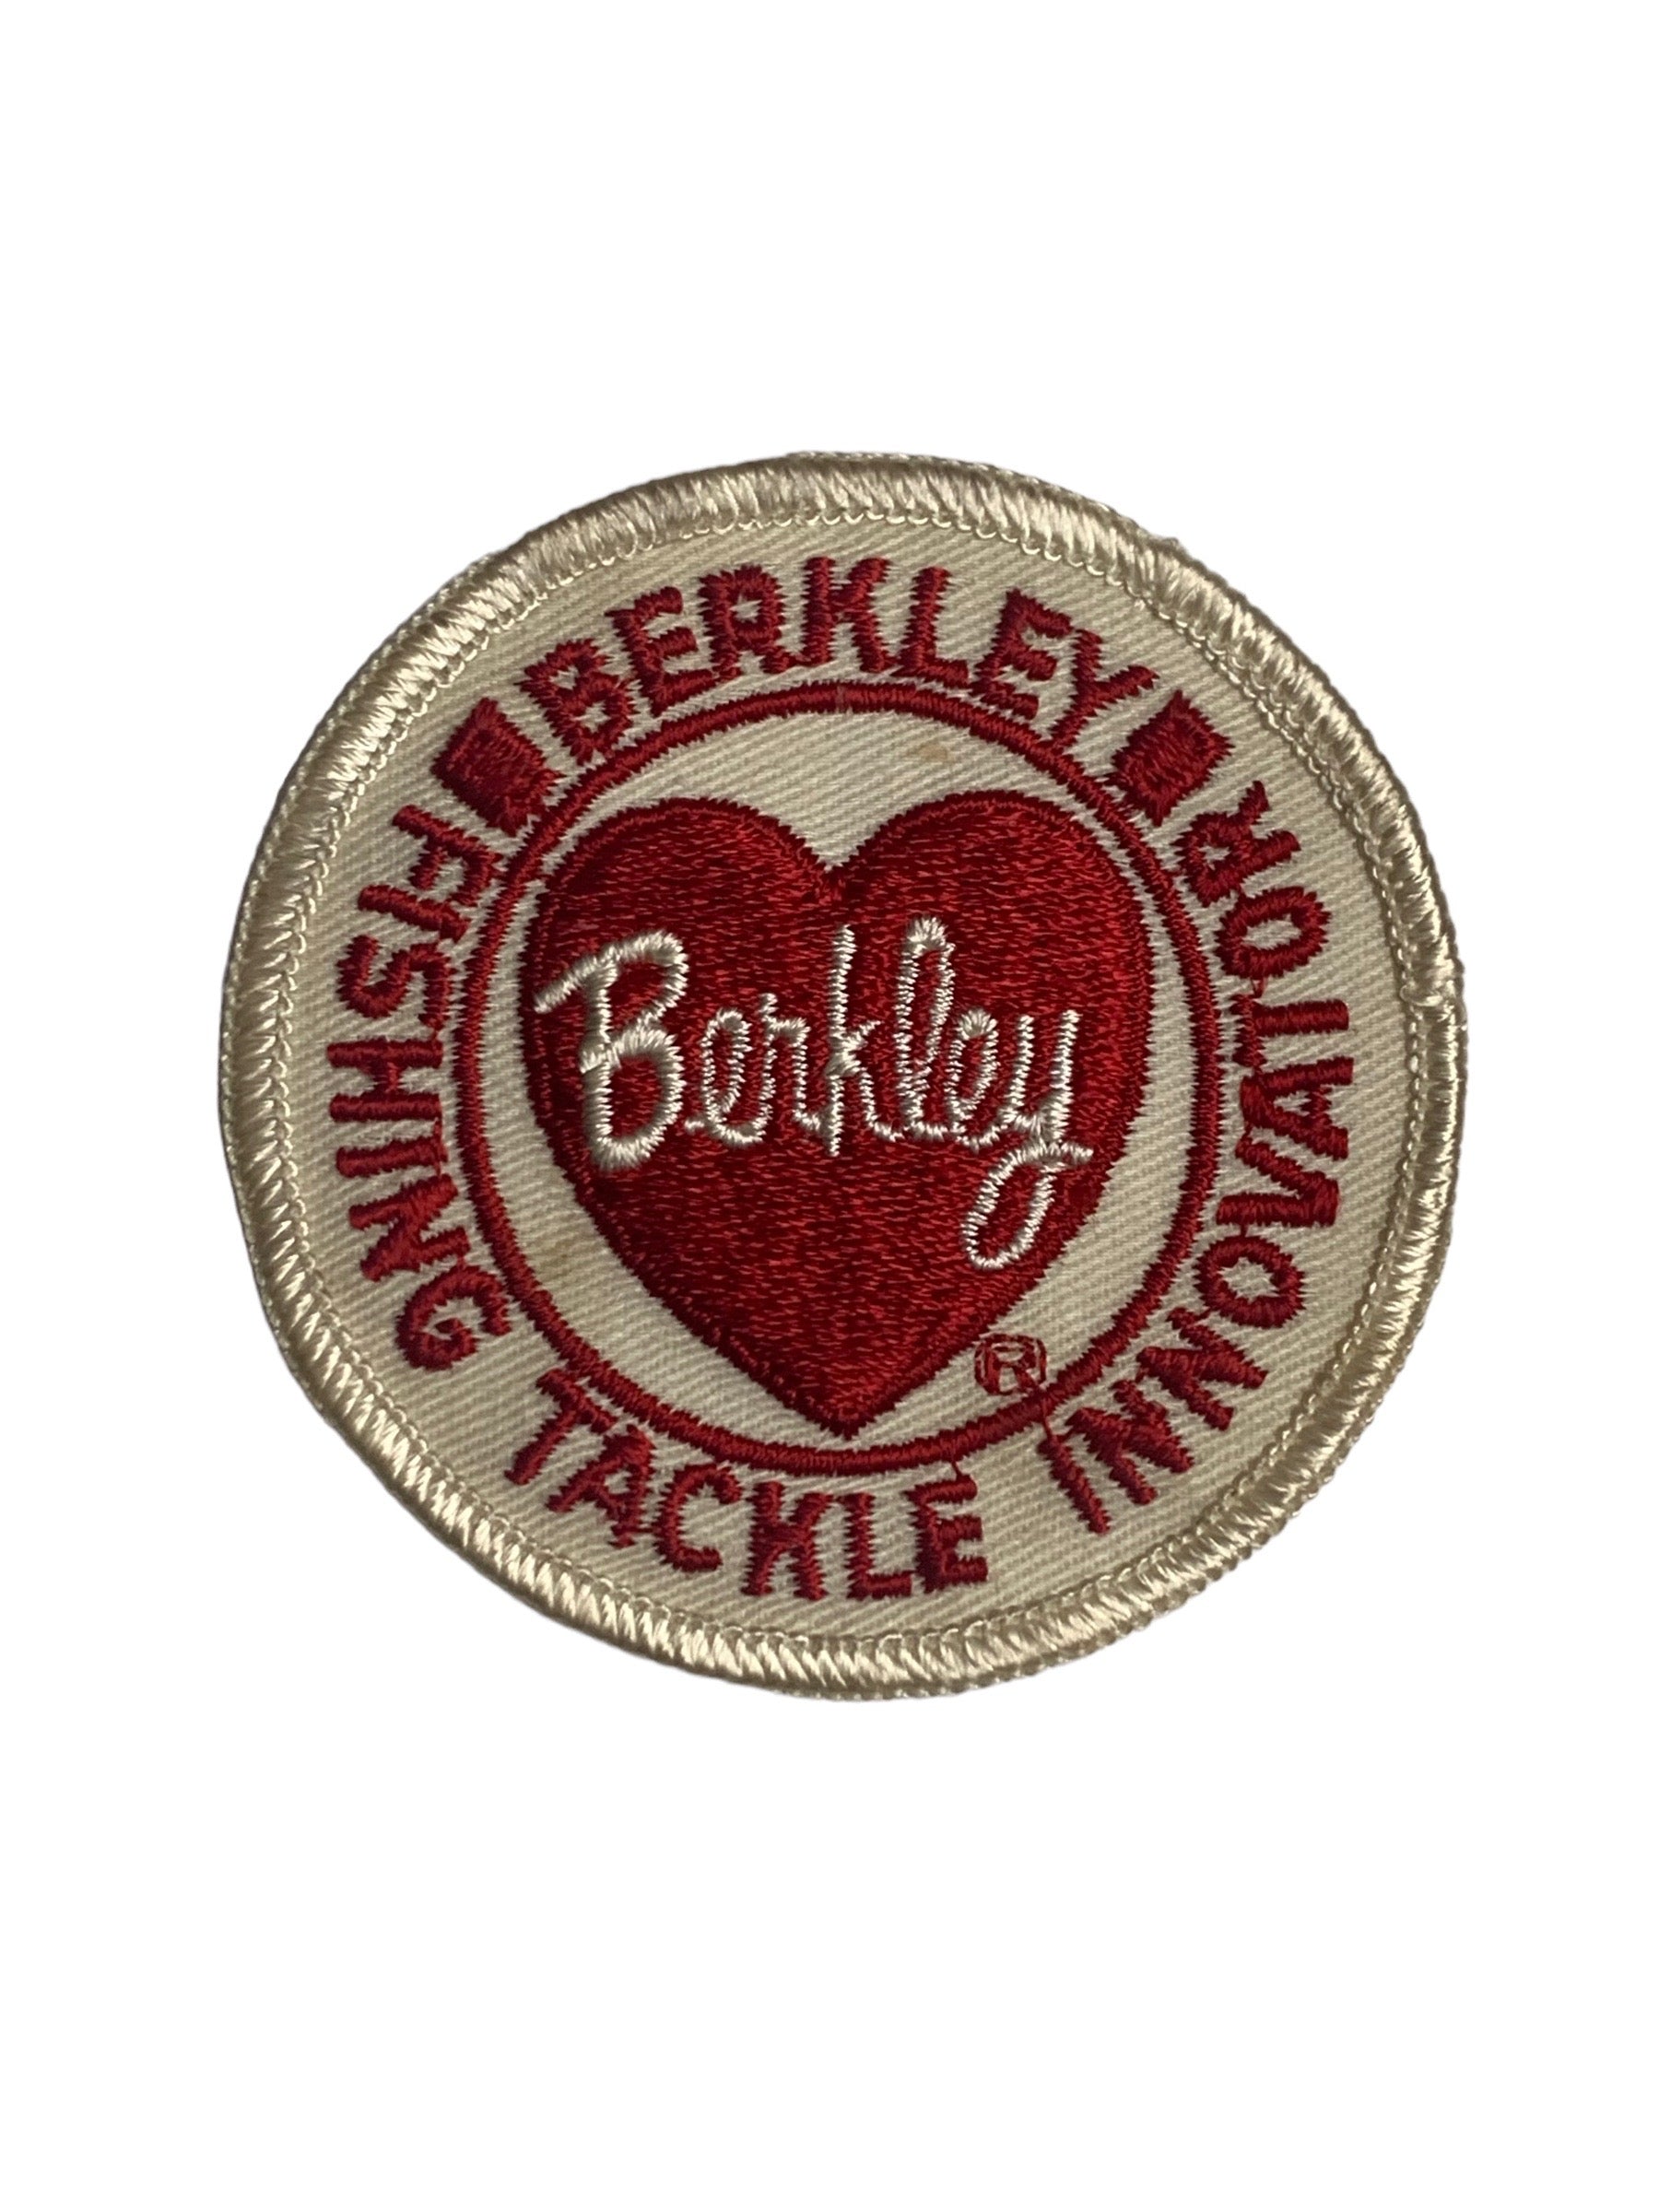 BERKLEY INNOVATOR FISHING TACKLE Vintage Patch – Toad Tackle